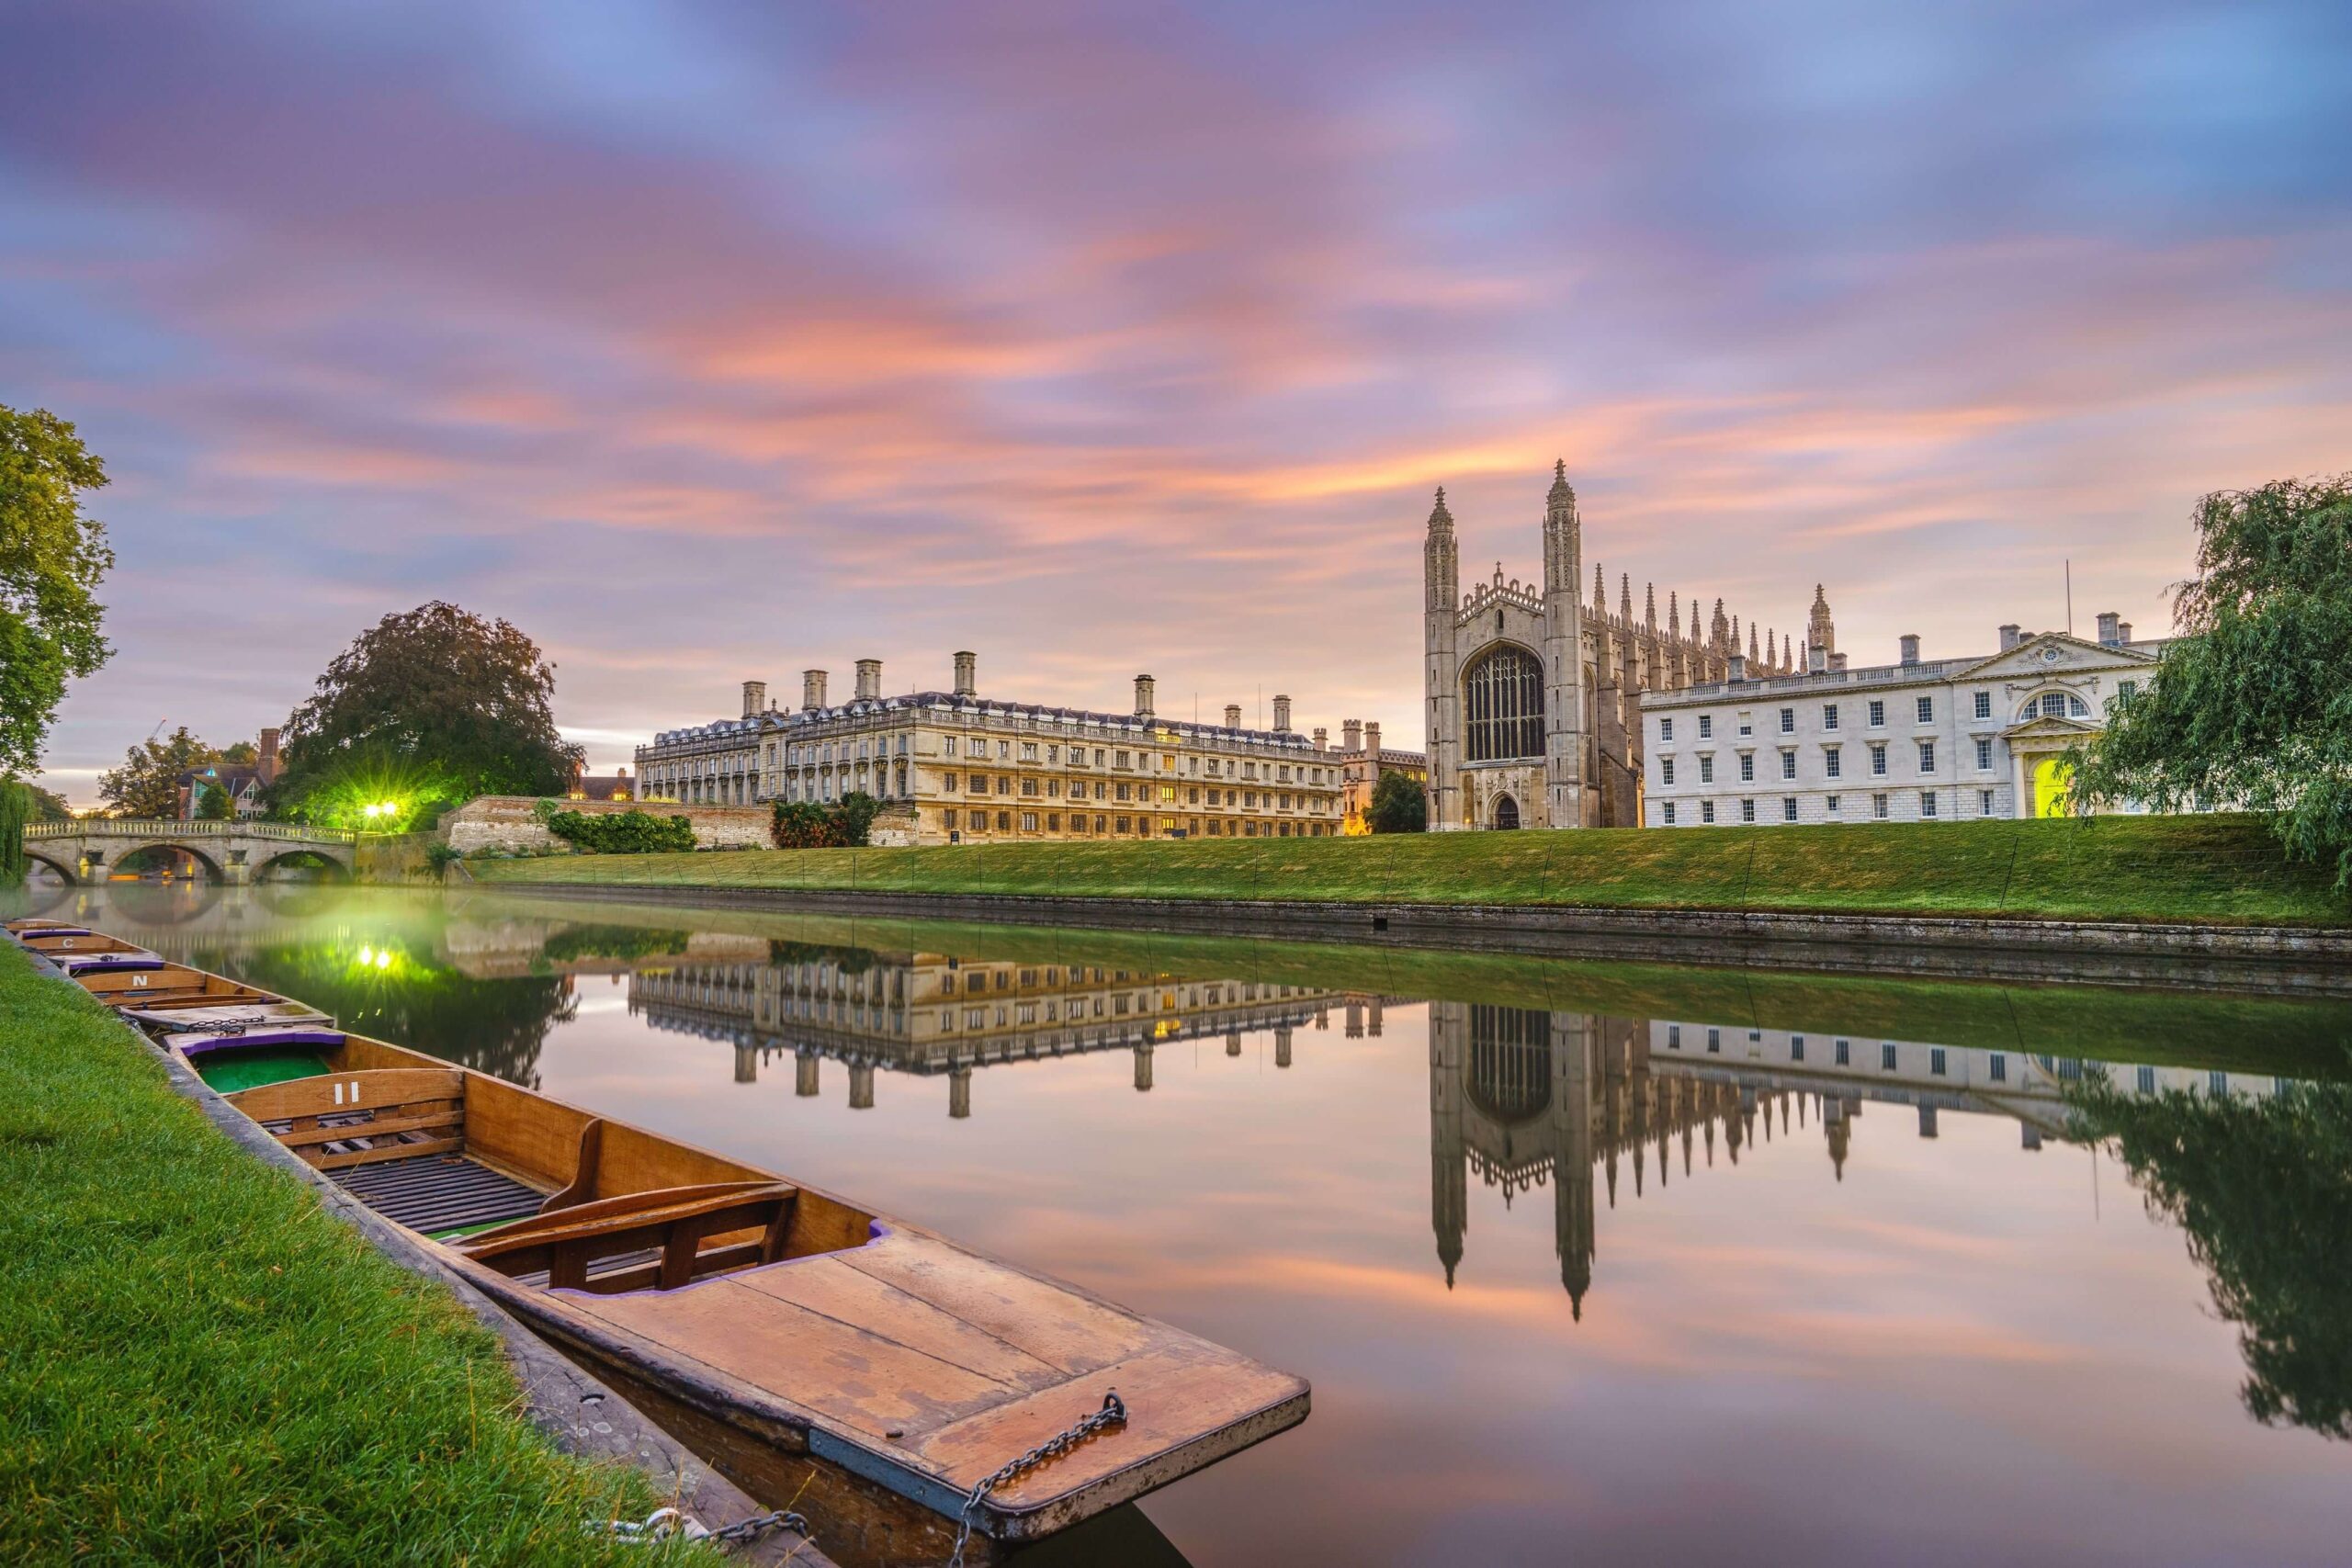 Winter in UK-Cambridge and Oxford Holiday Travel & Tour Package